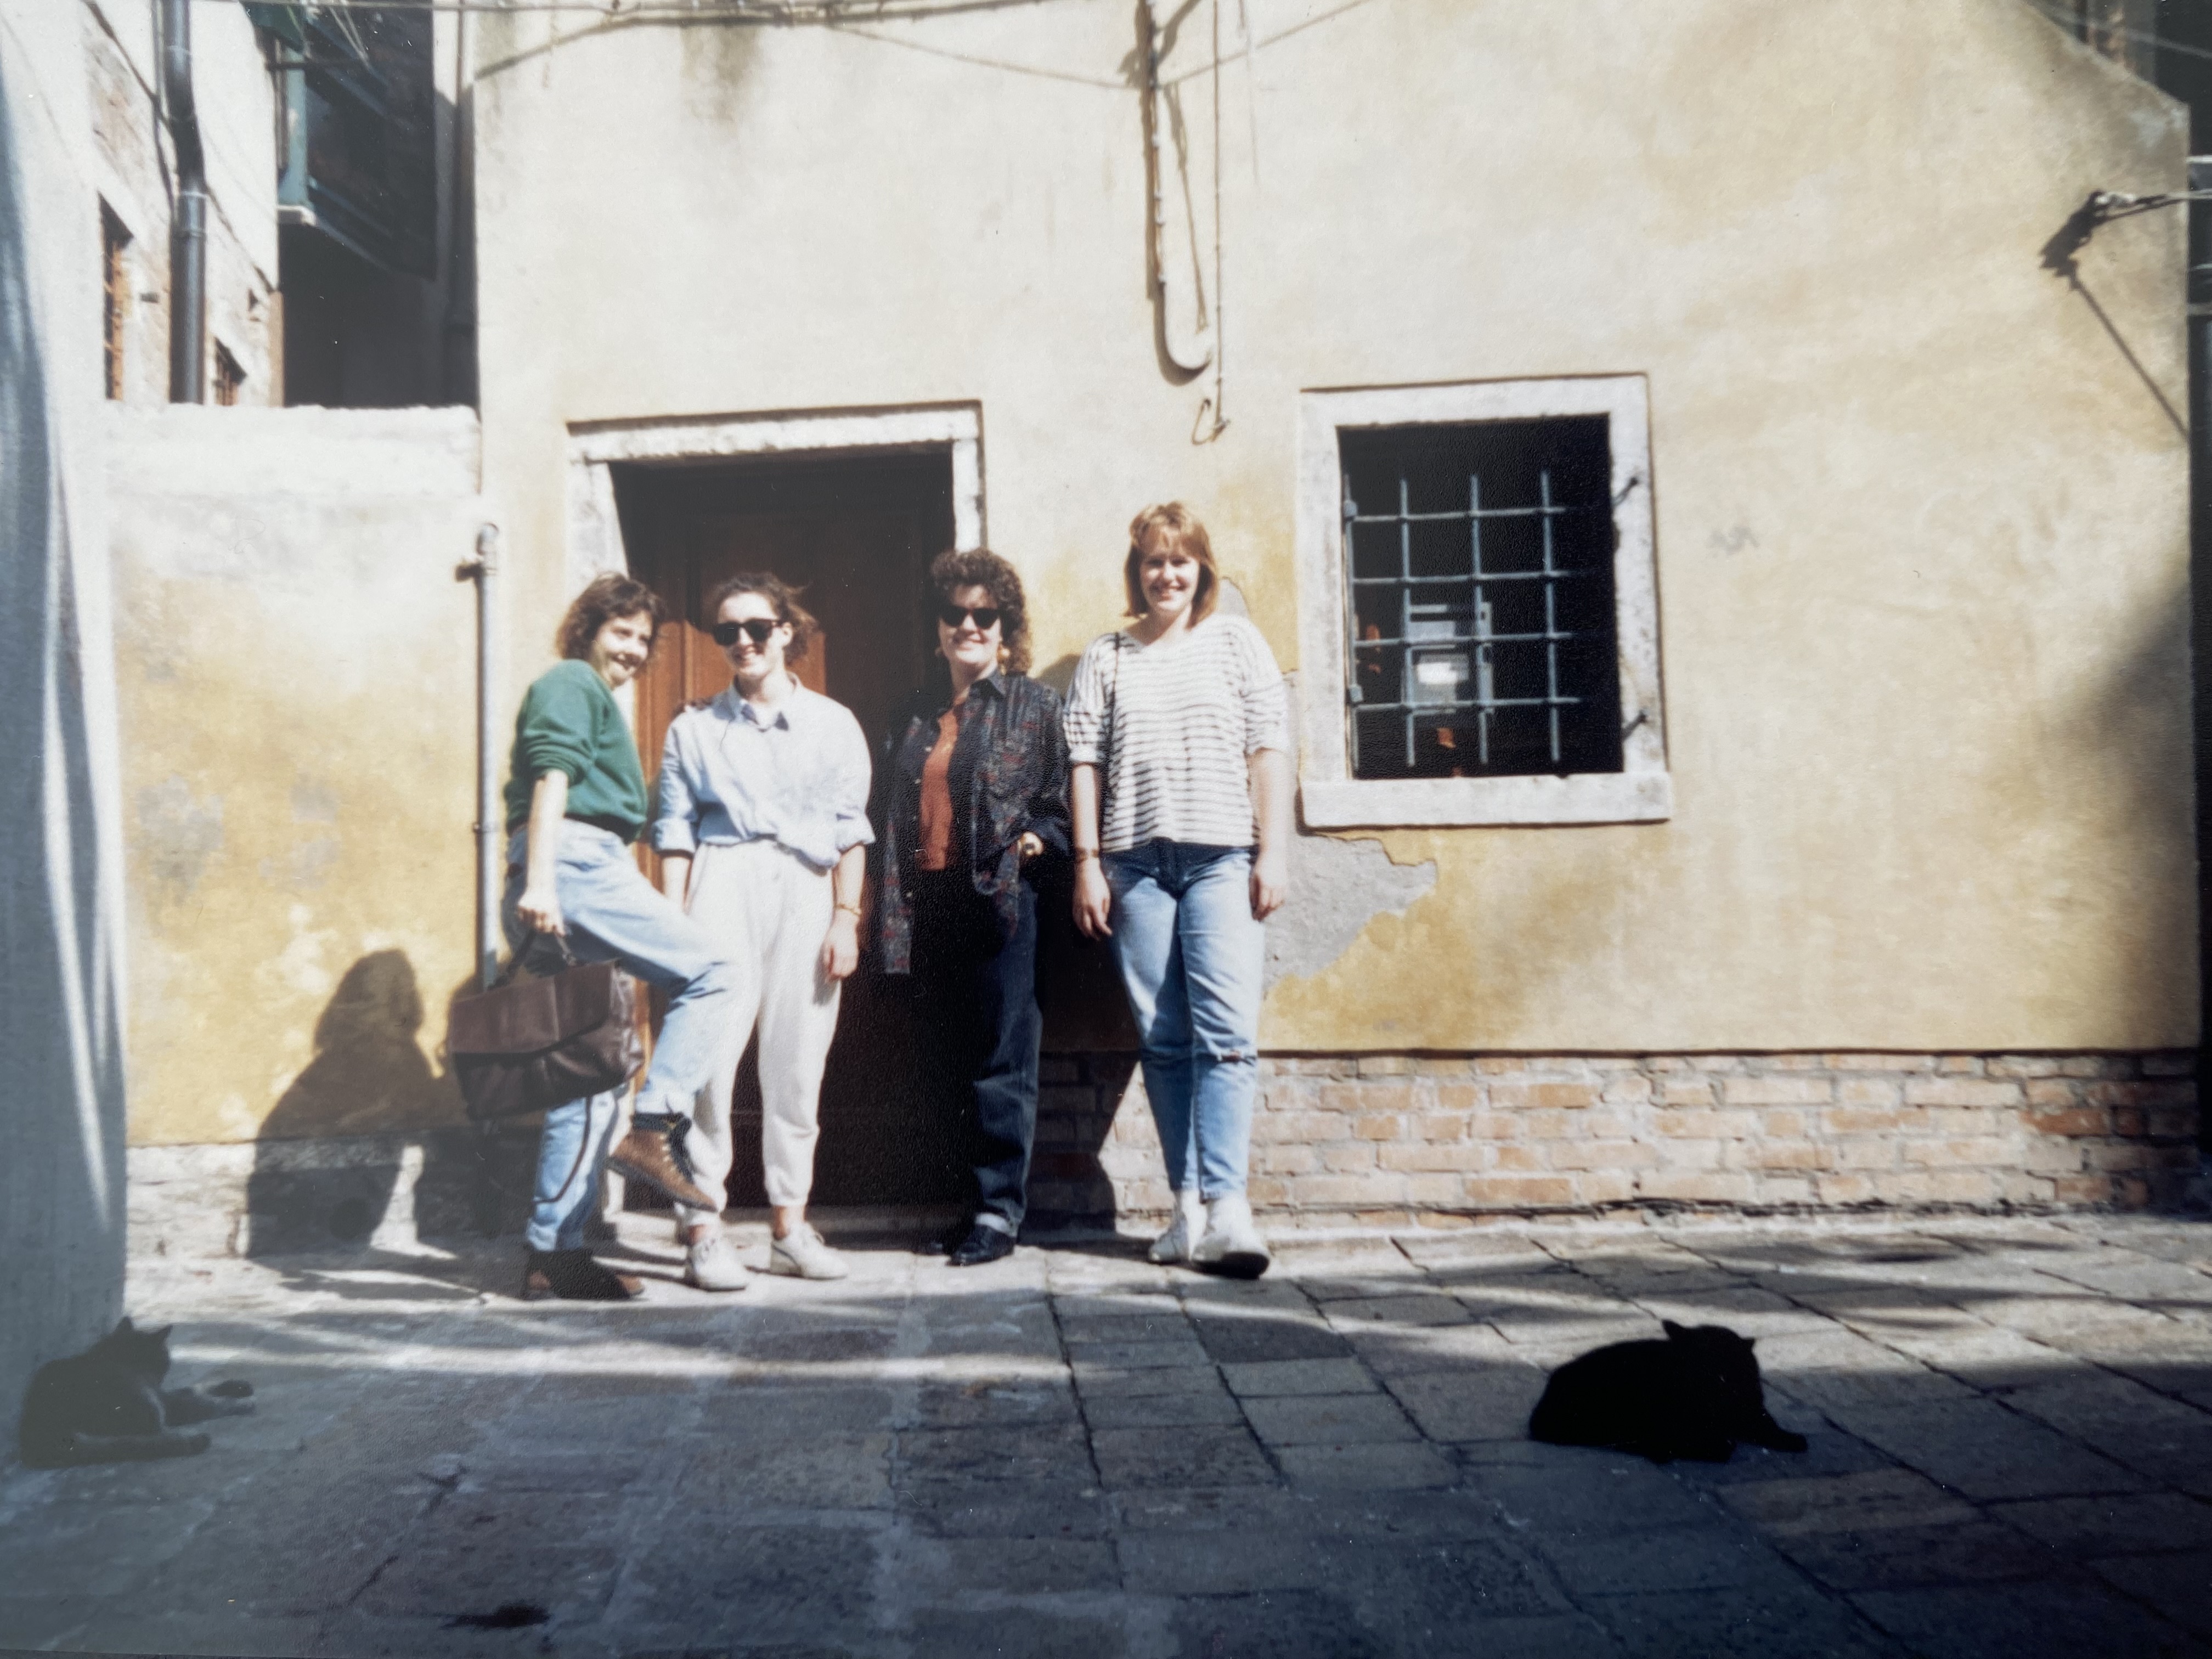 Antonia and friends outside a building in Venice